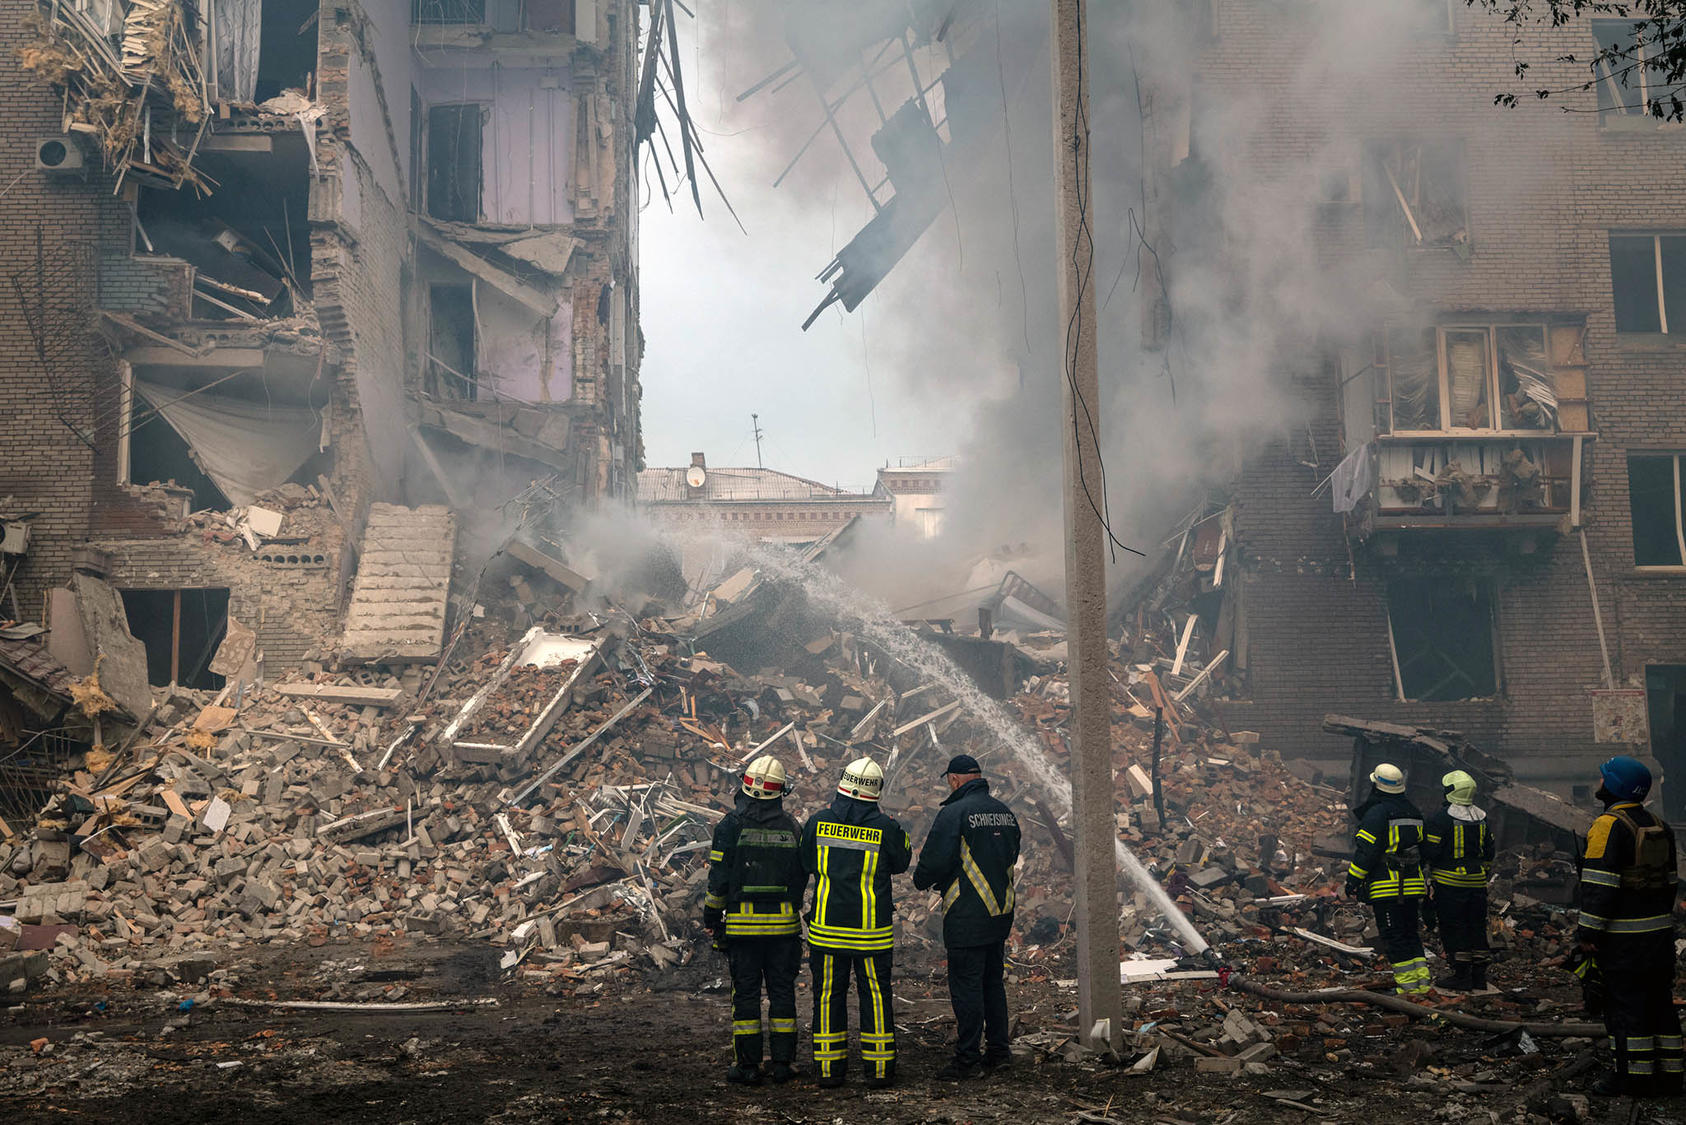 Ukrainian rescuers extinguish fires from an October 10 Russian missile strike in Zaporizhzhia, part of Russia’s aerial blitz targeting civilian homes and infrastructure vital to Ukrainians’ survival in the coming winter. (Nicole Tung/The New York Times)